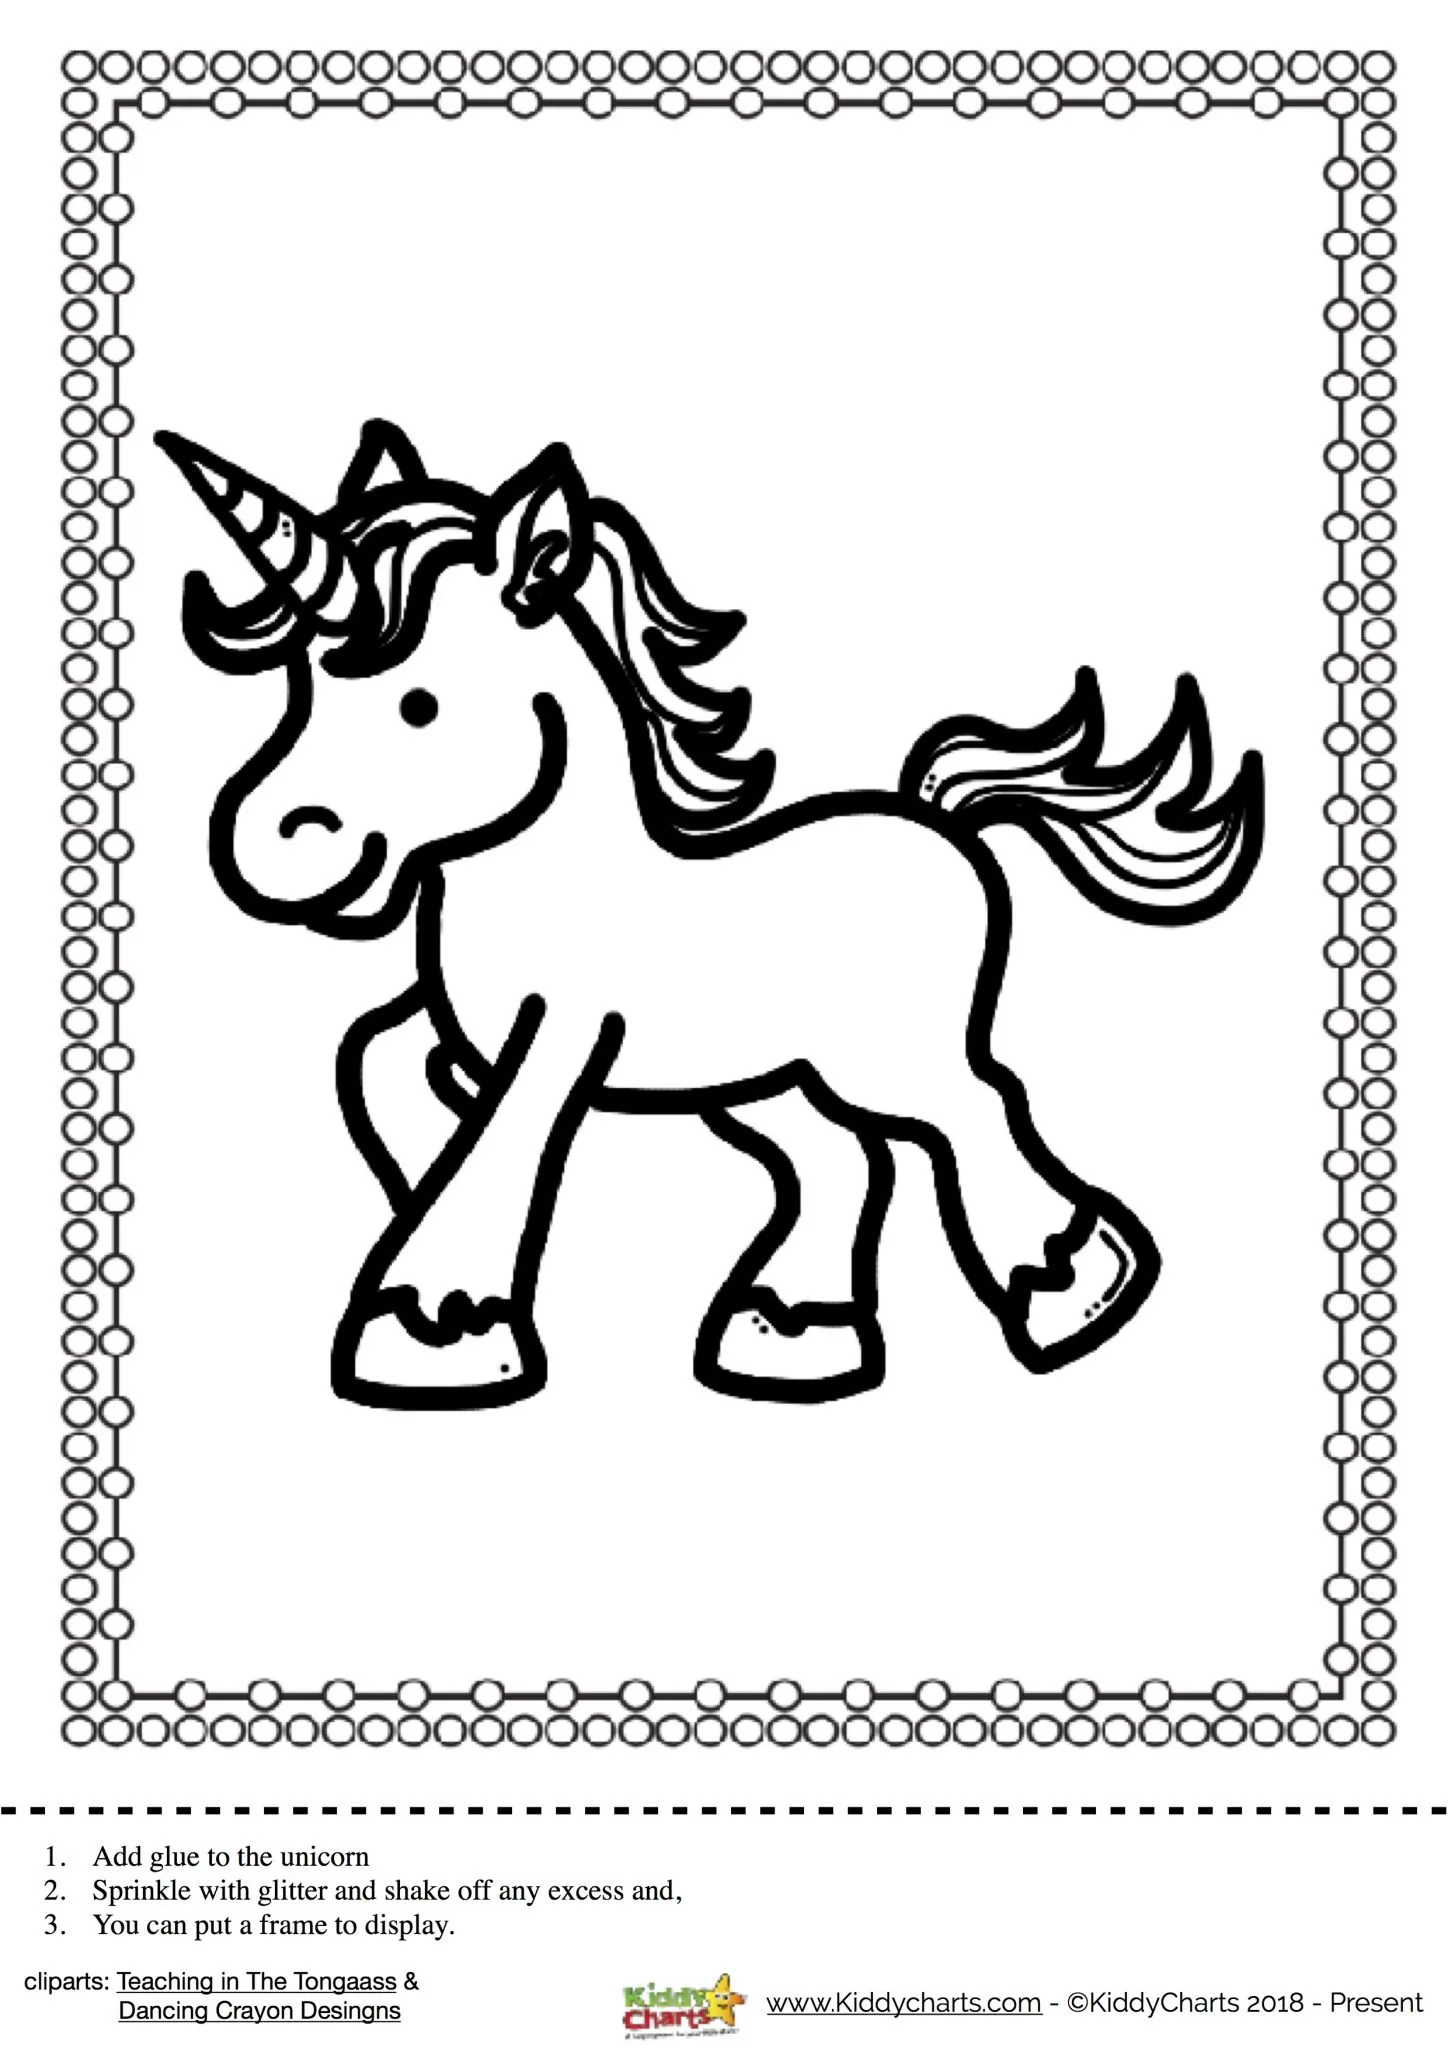 Create your own gorgeous Unicorn wall art with our lovely Unicorn printable template